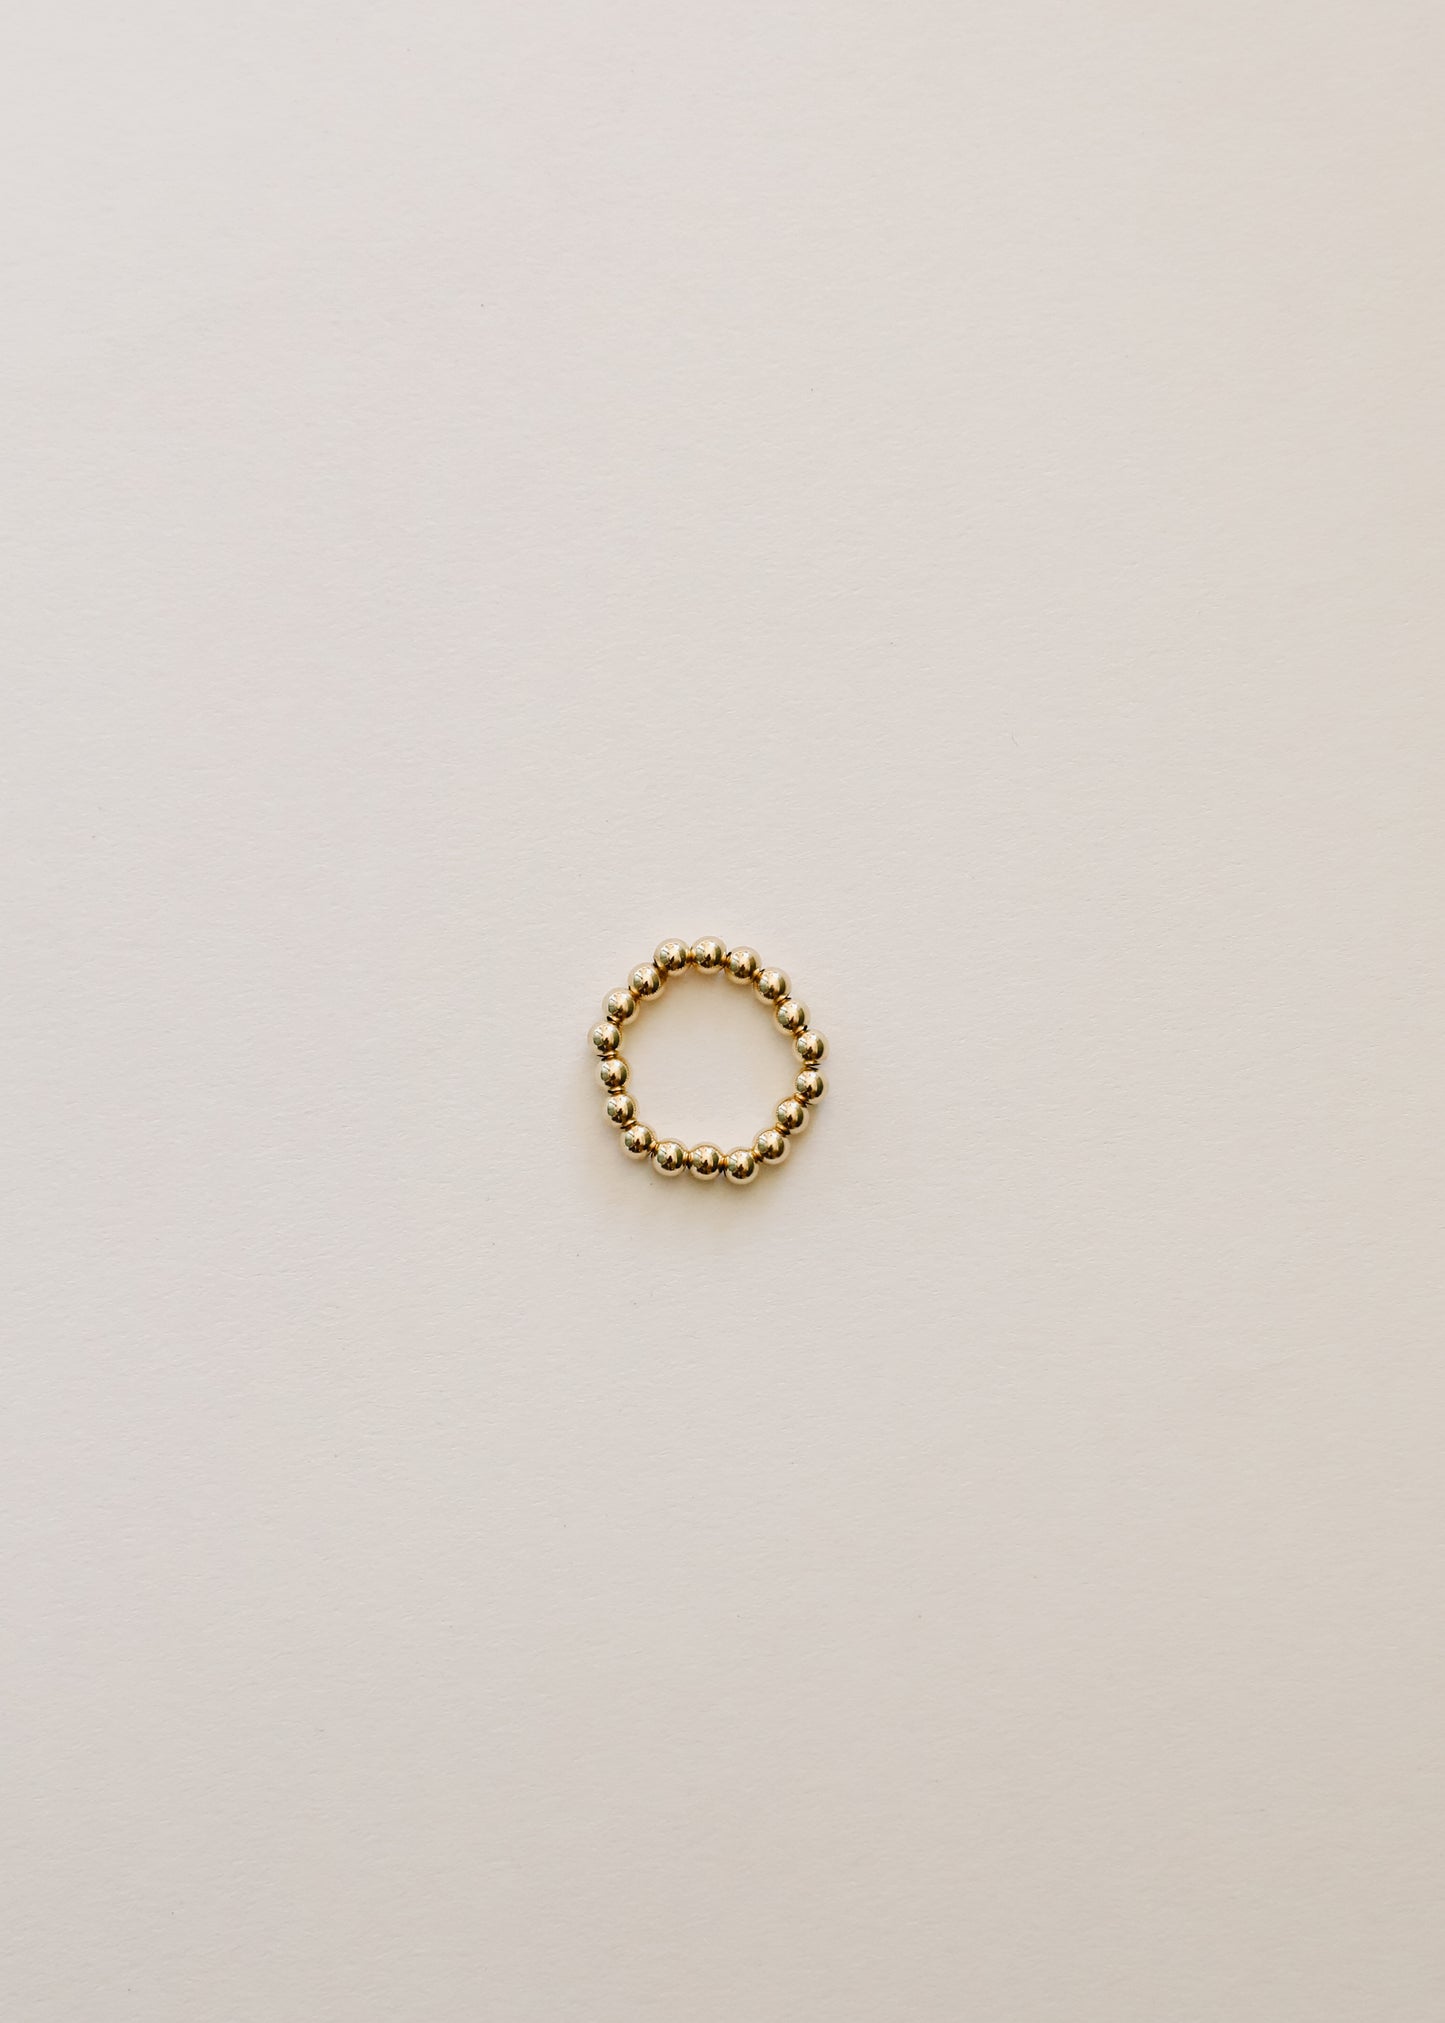 Gold Beaded Ring || Stack